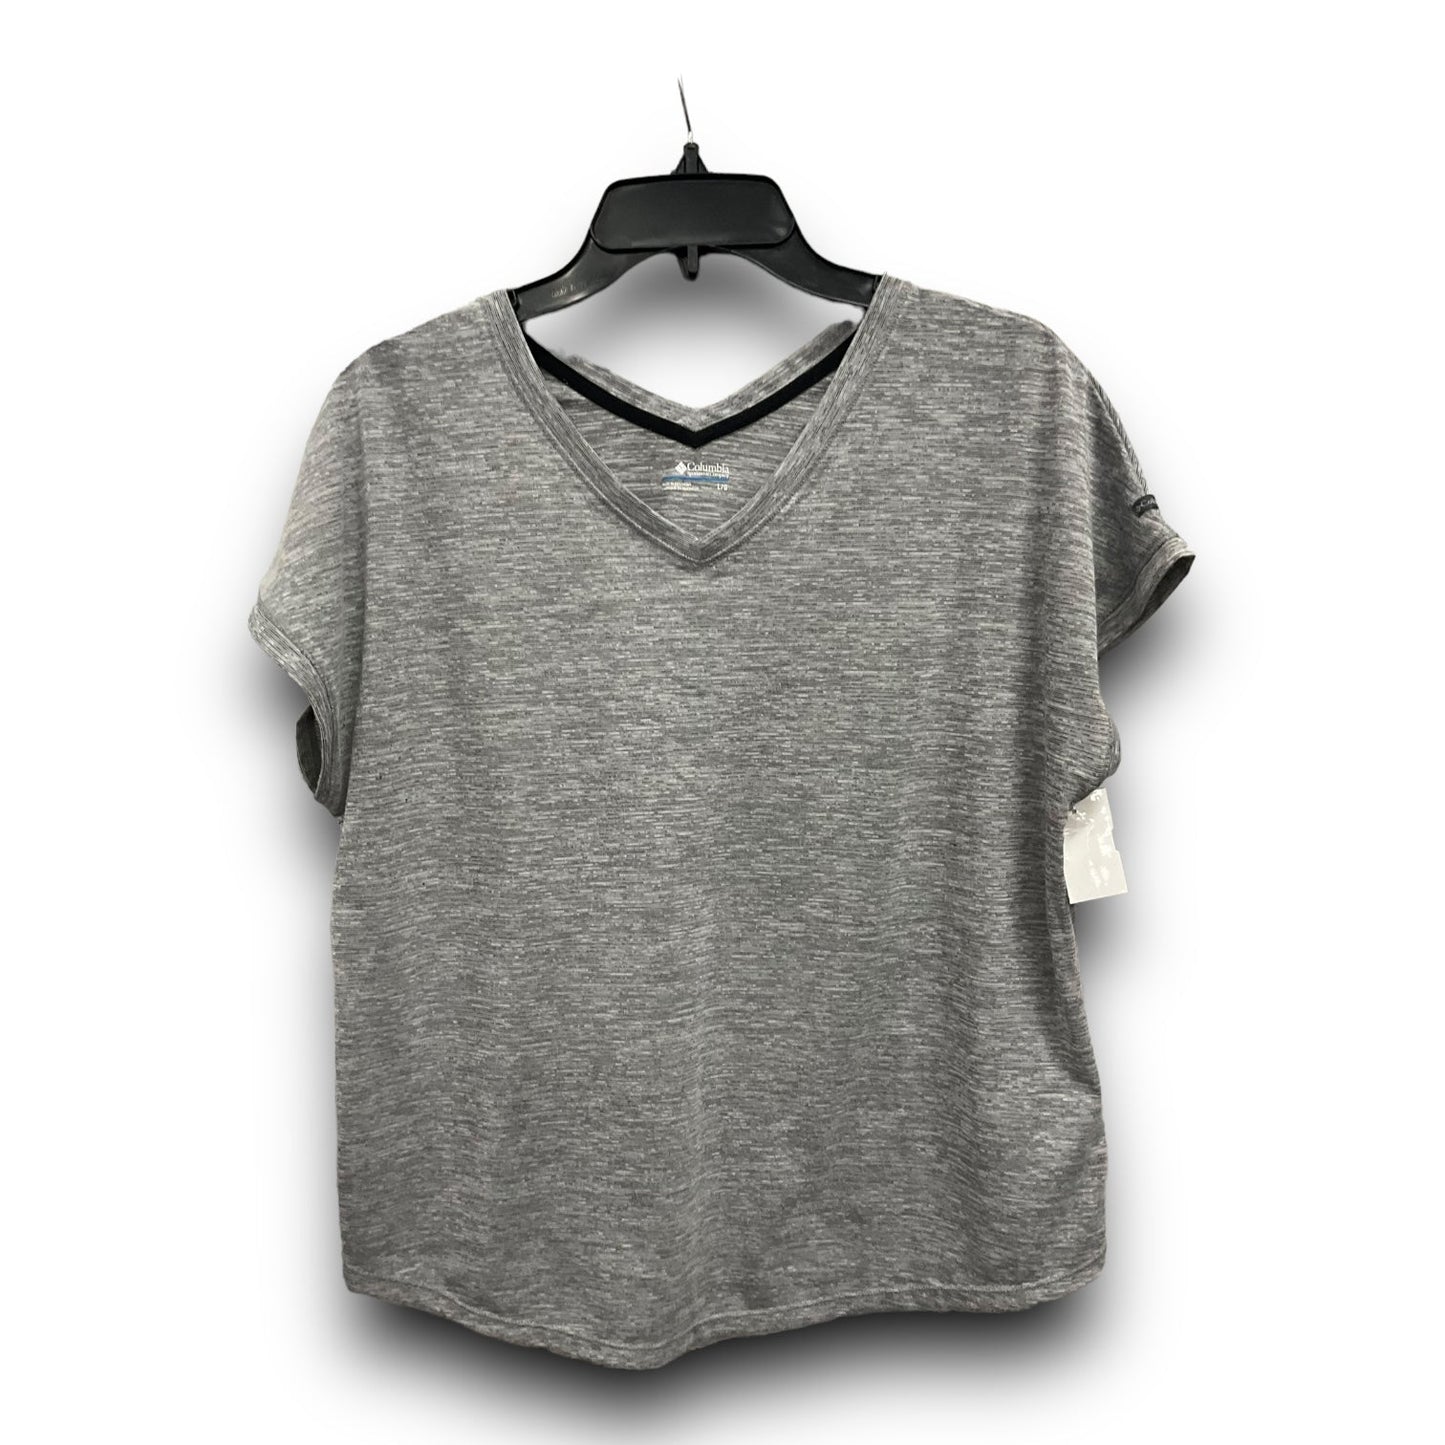 Grey Top Short Sleeve Columbia, Size L